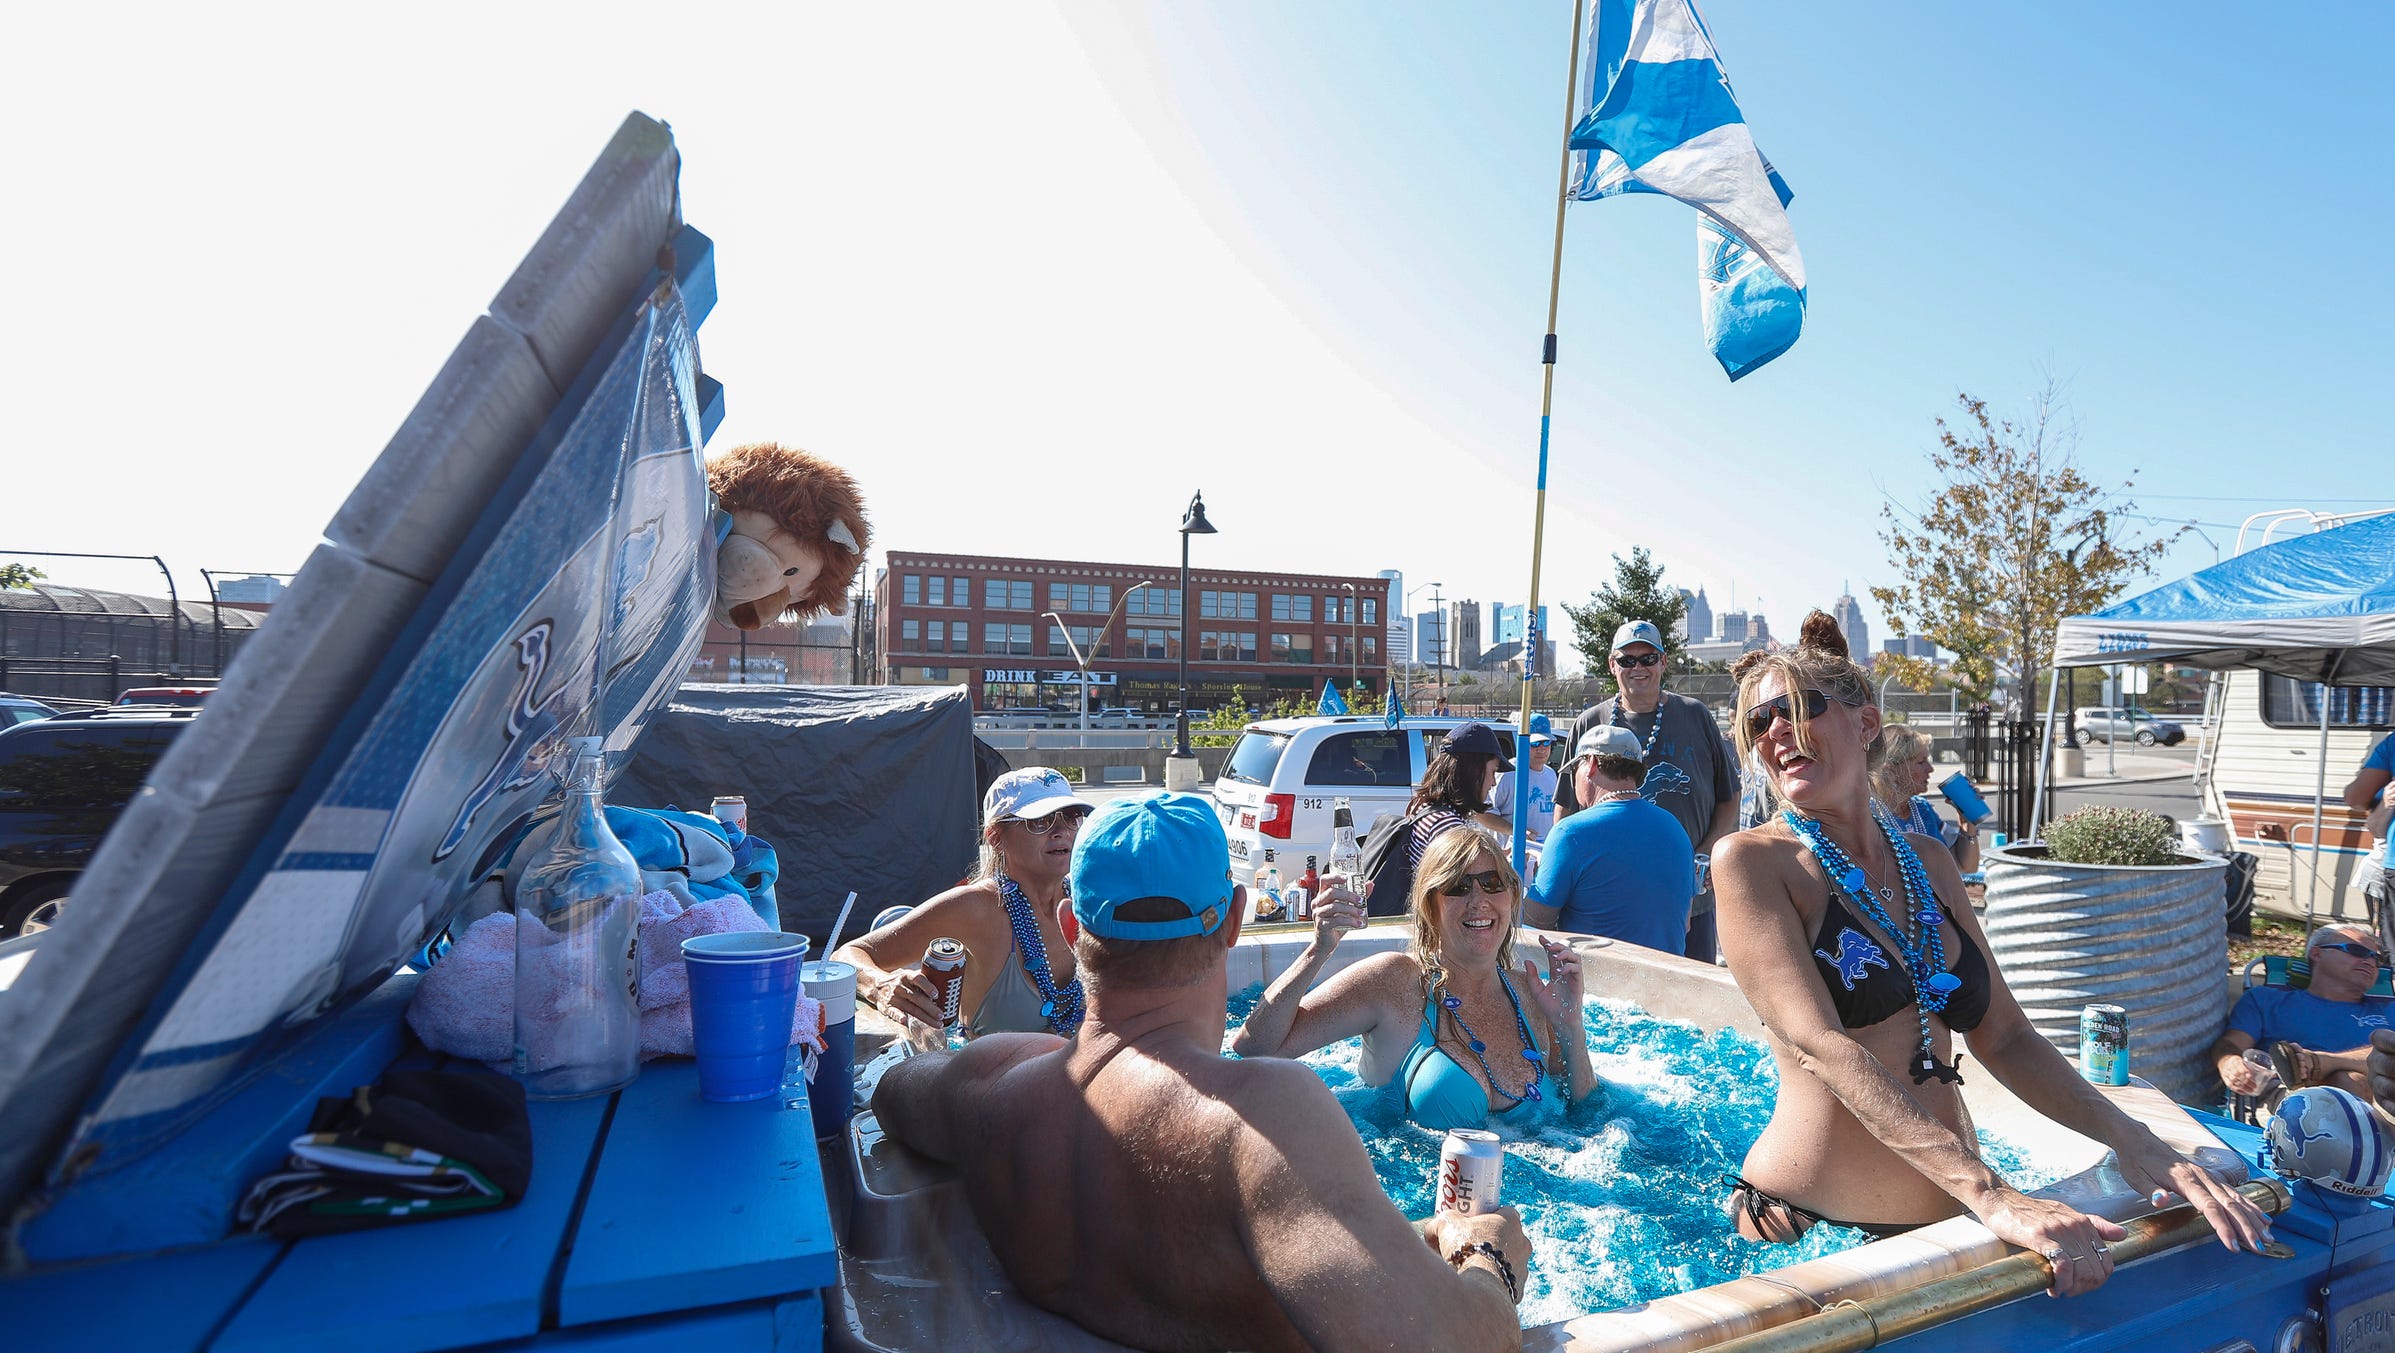 For Detroit Lions games, Eastern Market is THE spot for tailgating